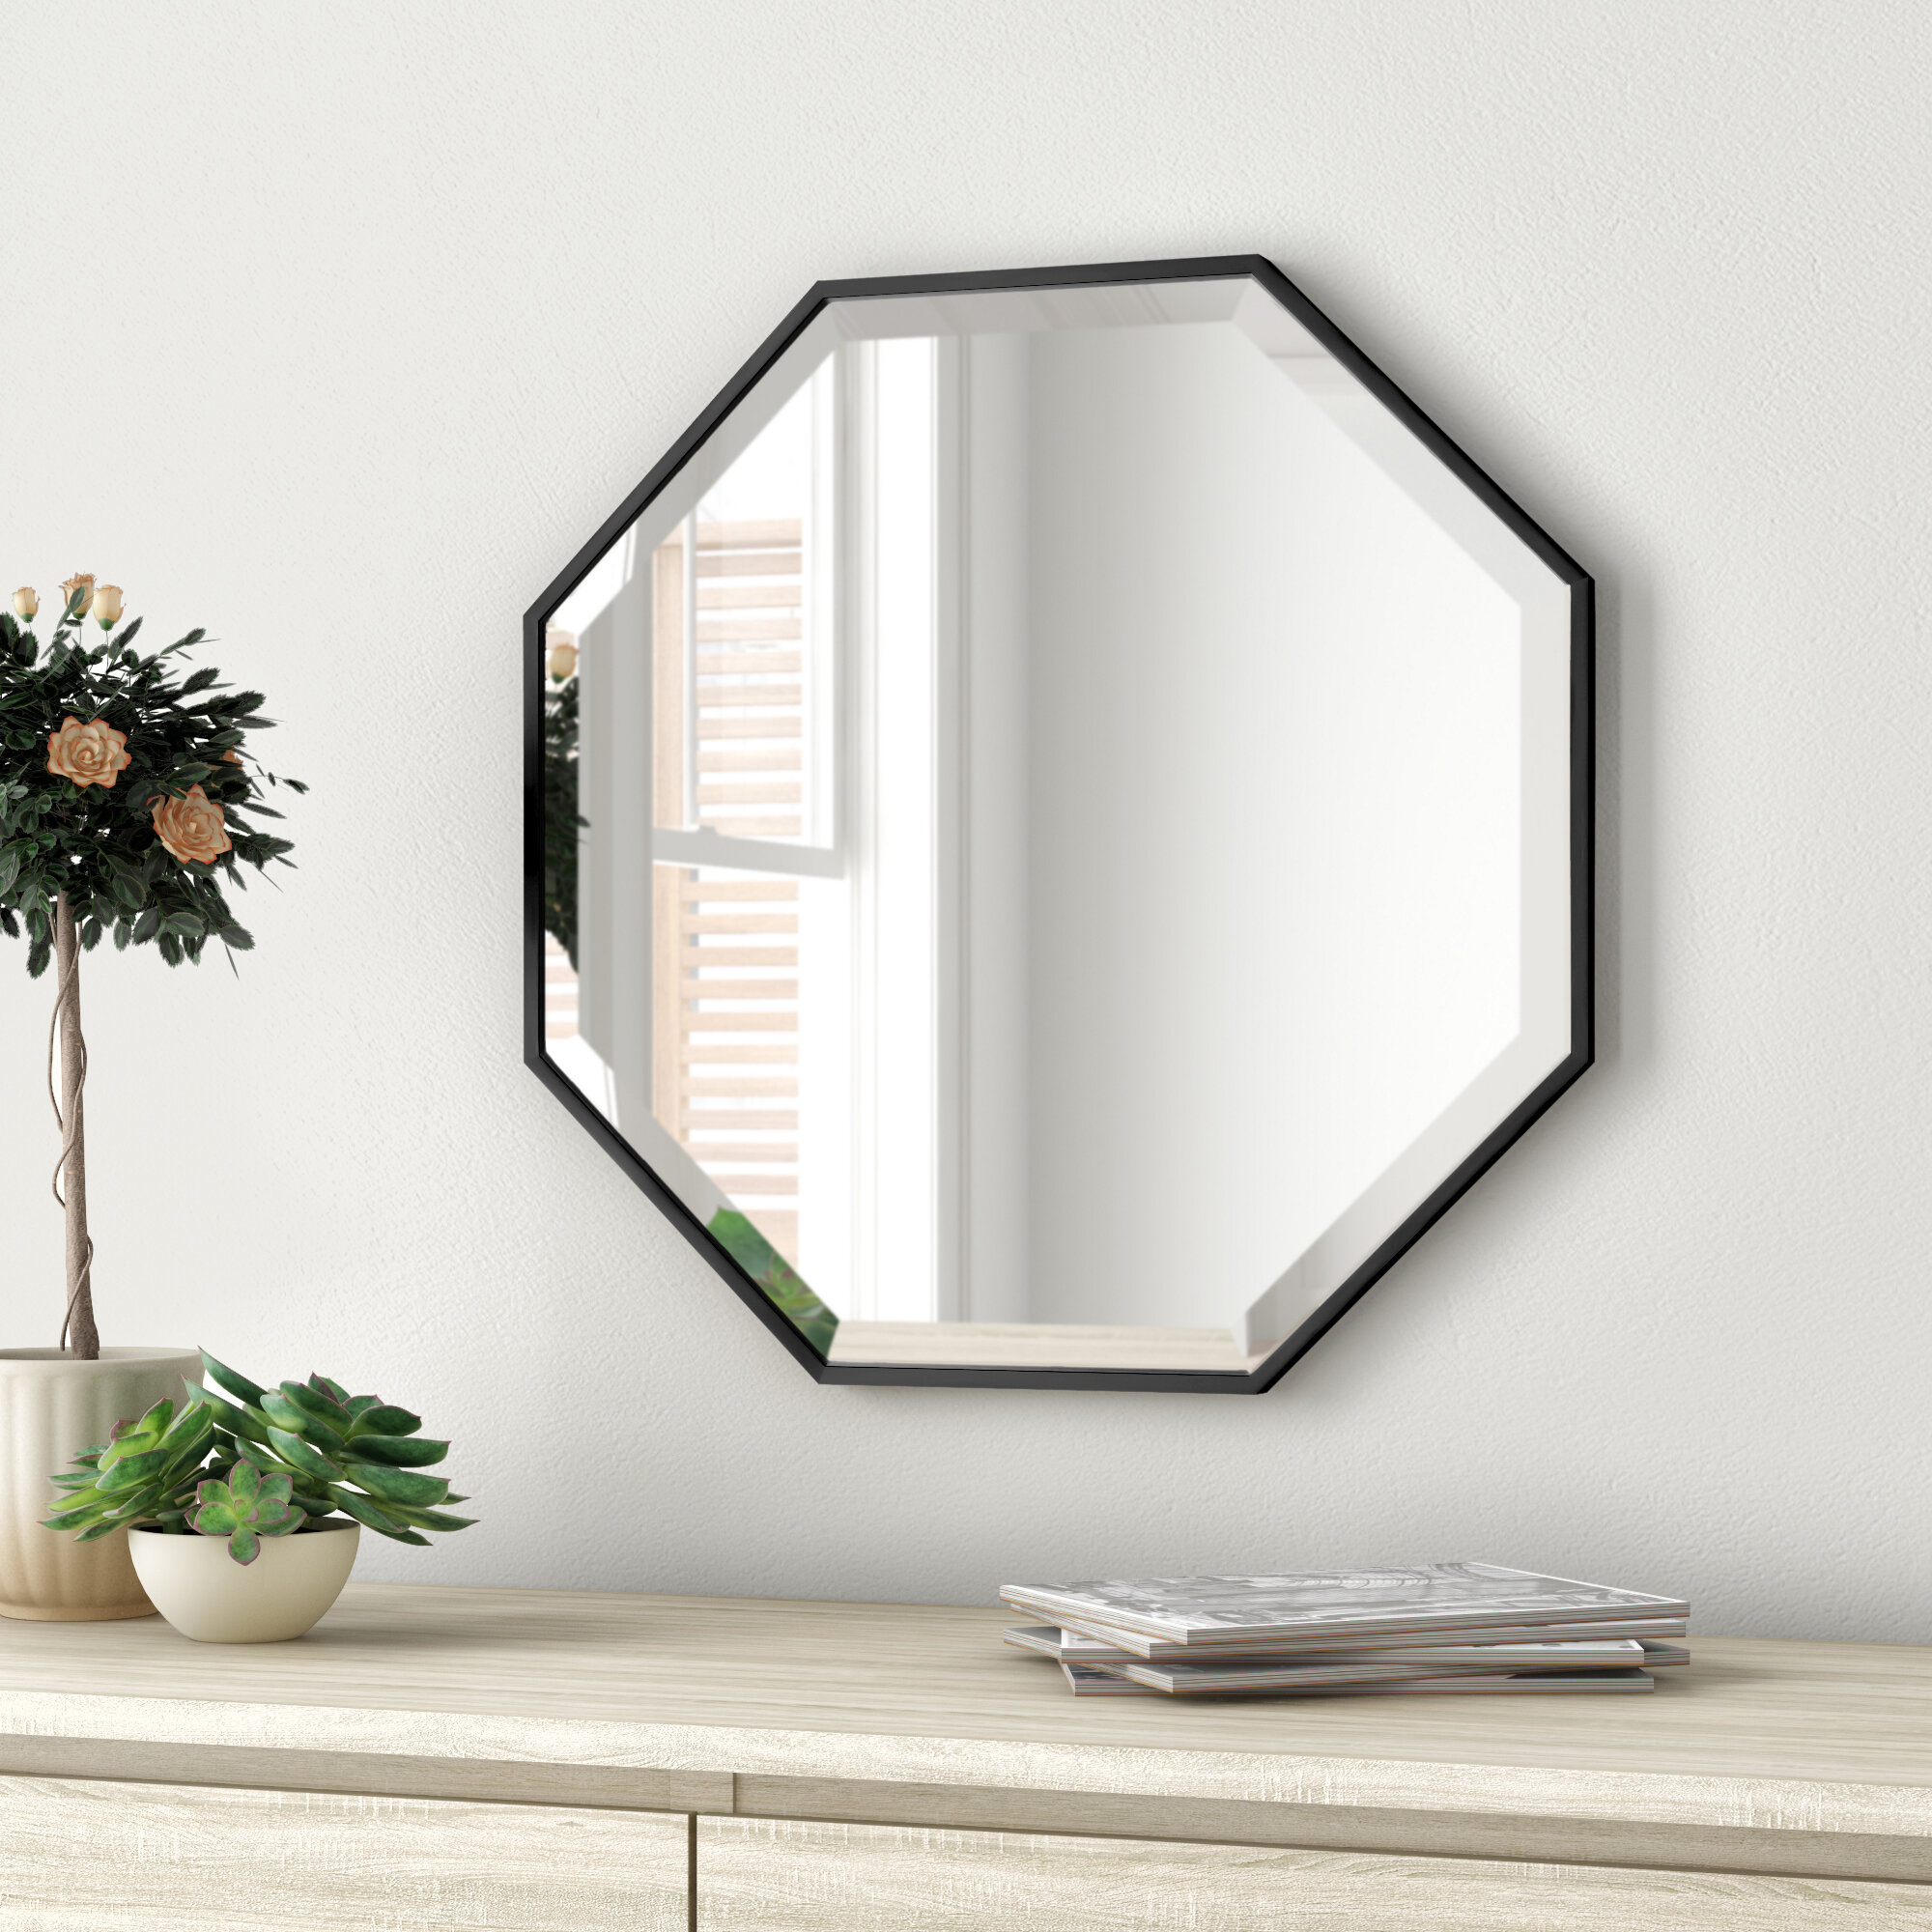 Cloverly Octagon Accent Mirror Wade Logan Finish: Gold, Size: 24.75 x 24.75